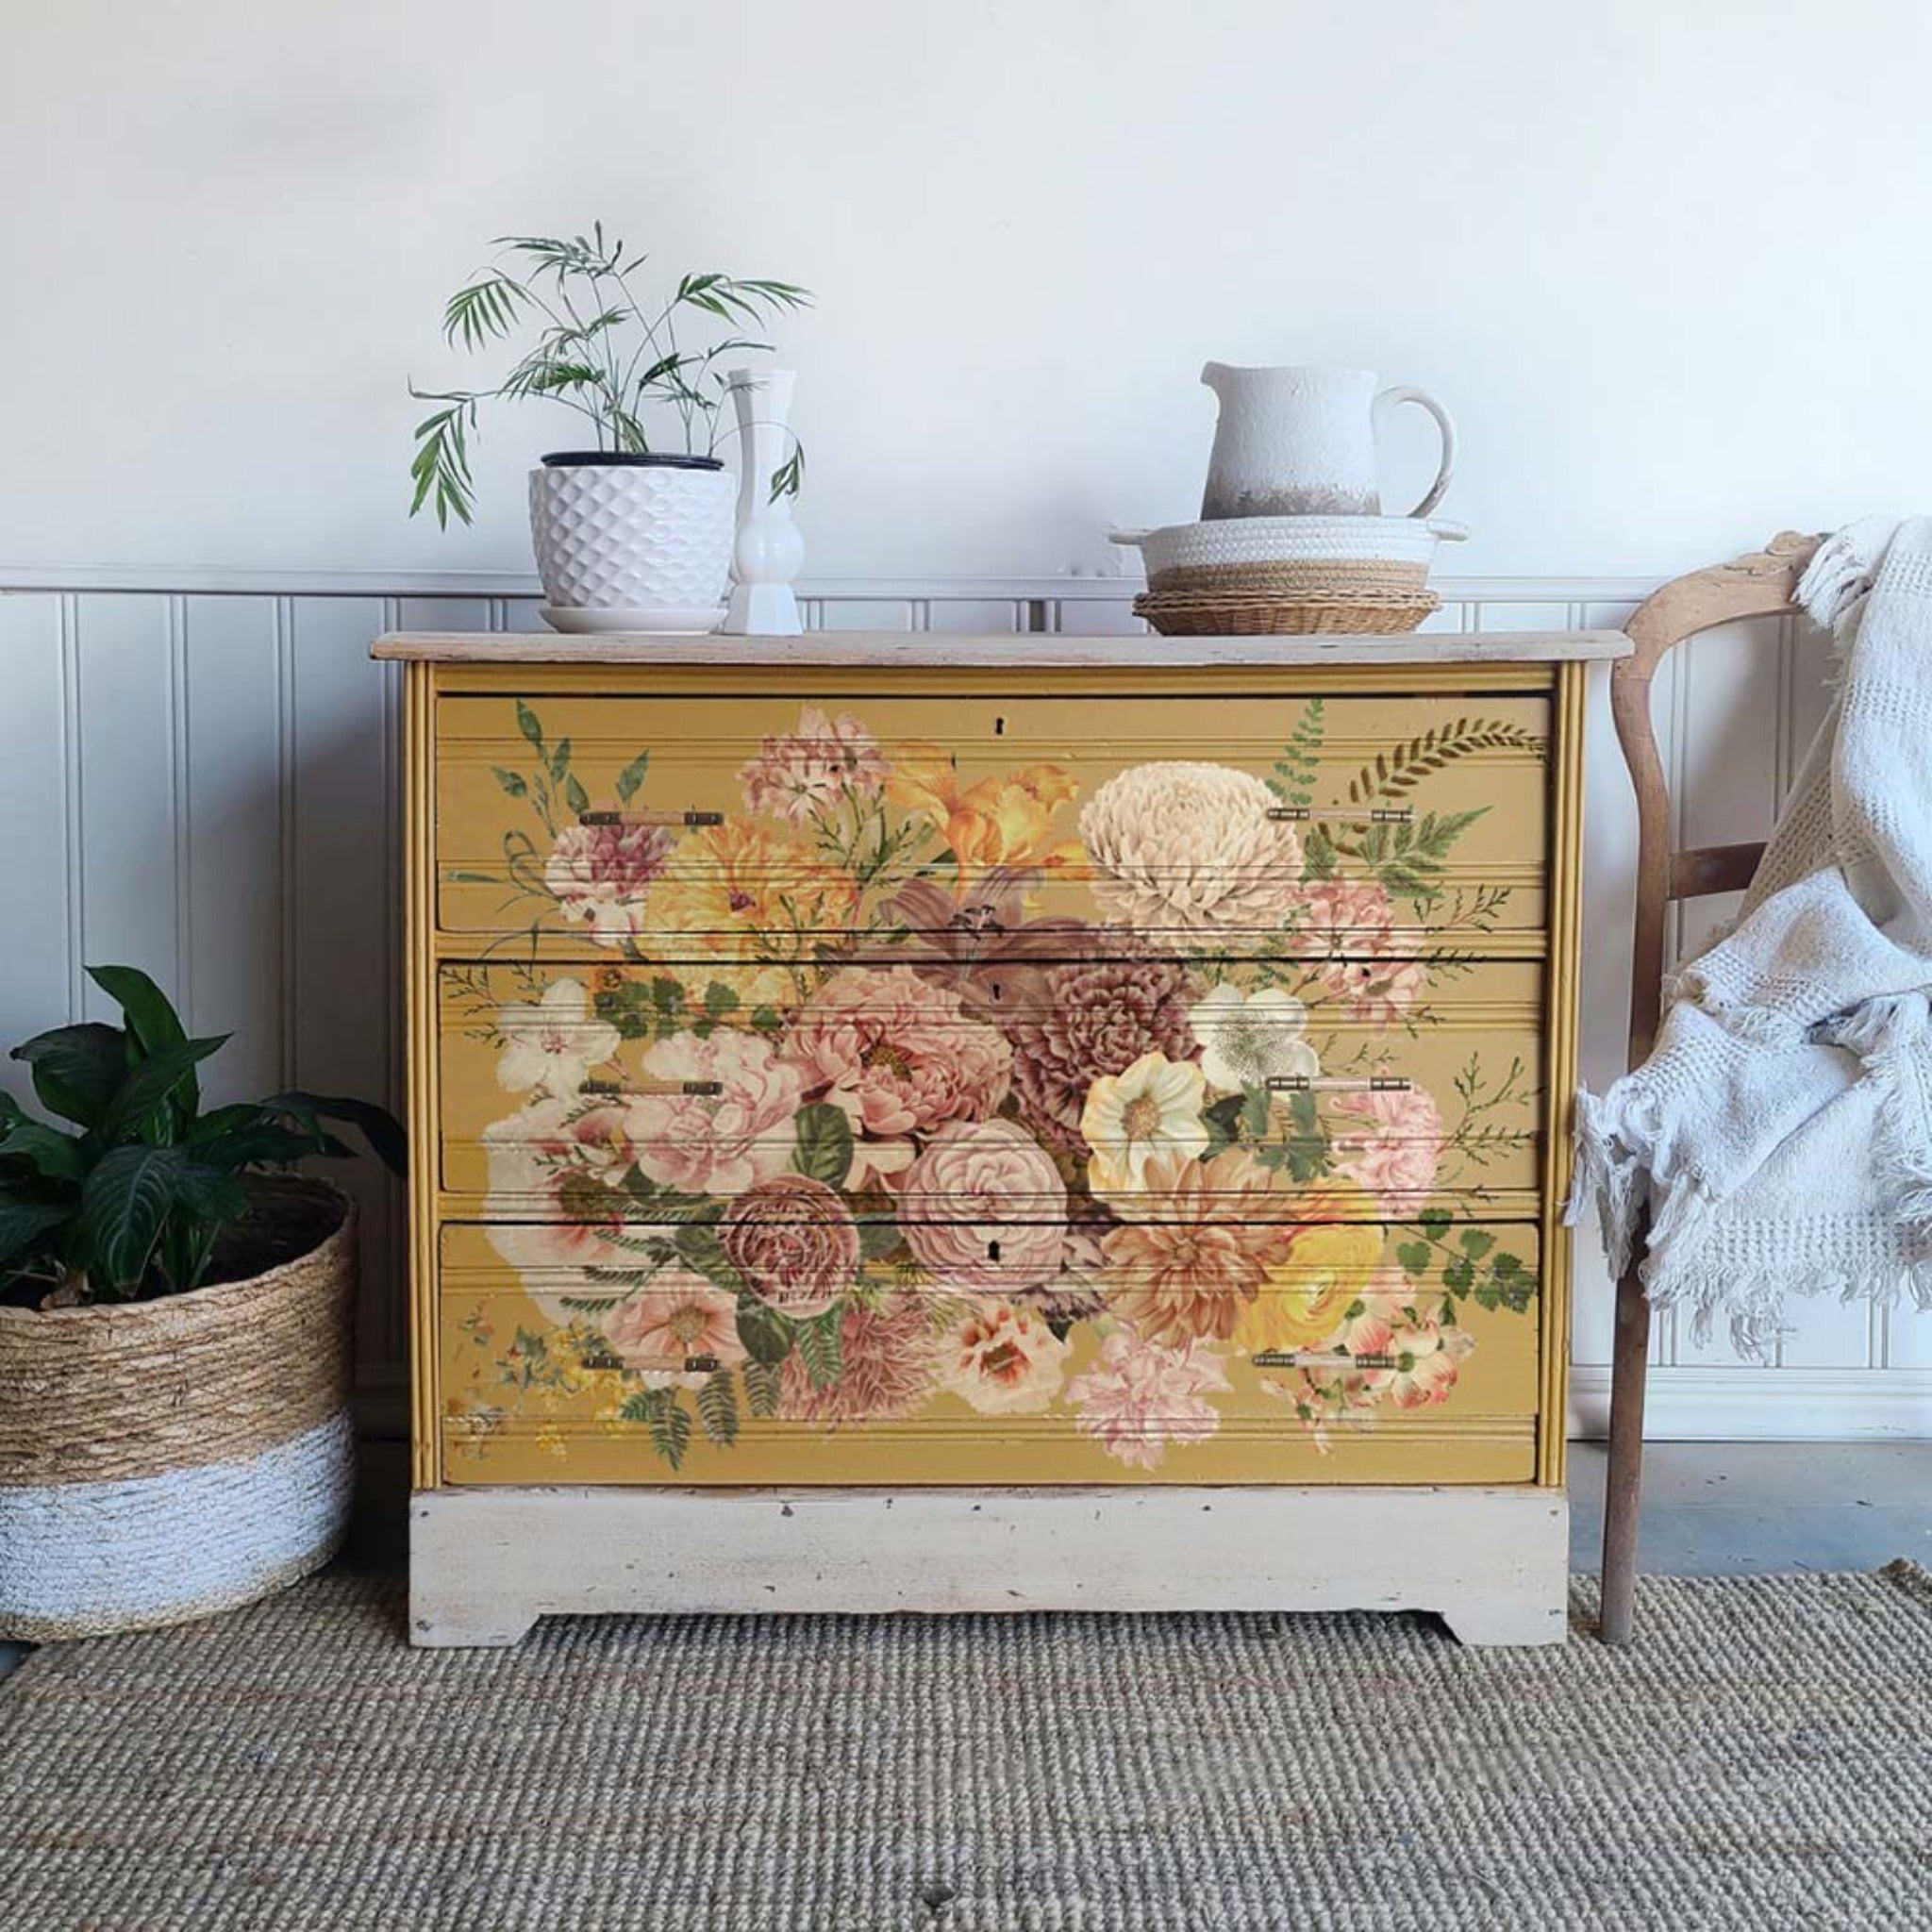 A vintage 3-drawer dresser is painted dark mustard yellow with cream and features ReDesign with Prima's Kacha Woodland Floral transfer covering the front of its drawers.